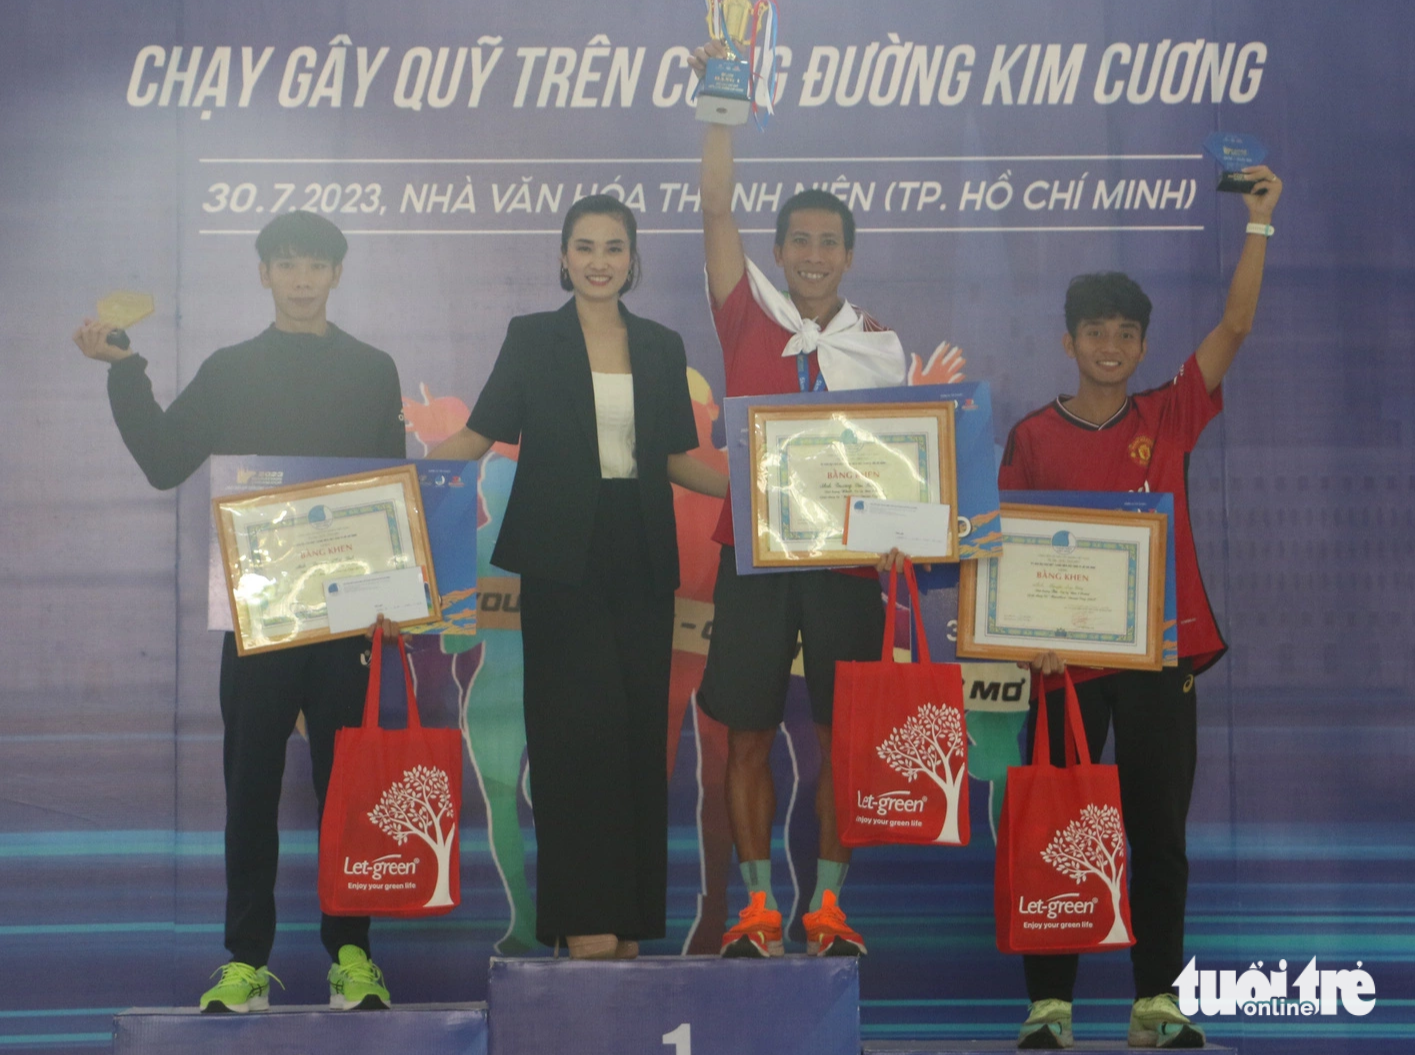 The three winners of the men’s 5km race are awarded first, runner-up, and second runner-up prizes at the 2023 Marathon Dream Cup in Ho Chi Minh City, July 30, 2023. Photo: Binh Minh / Tuoi Tre